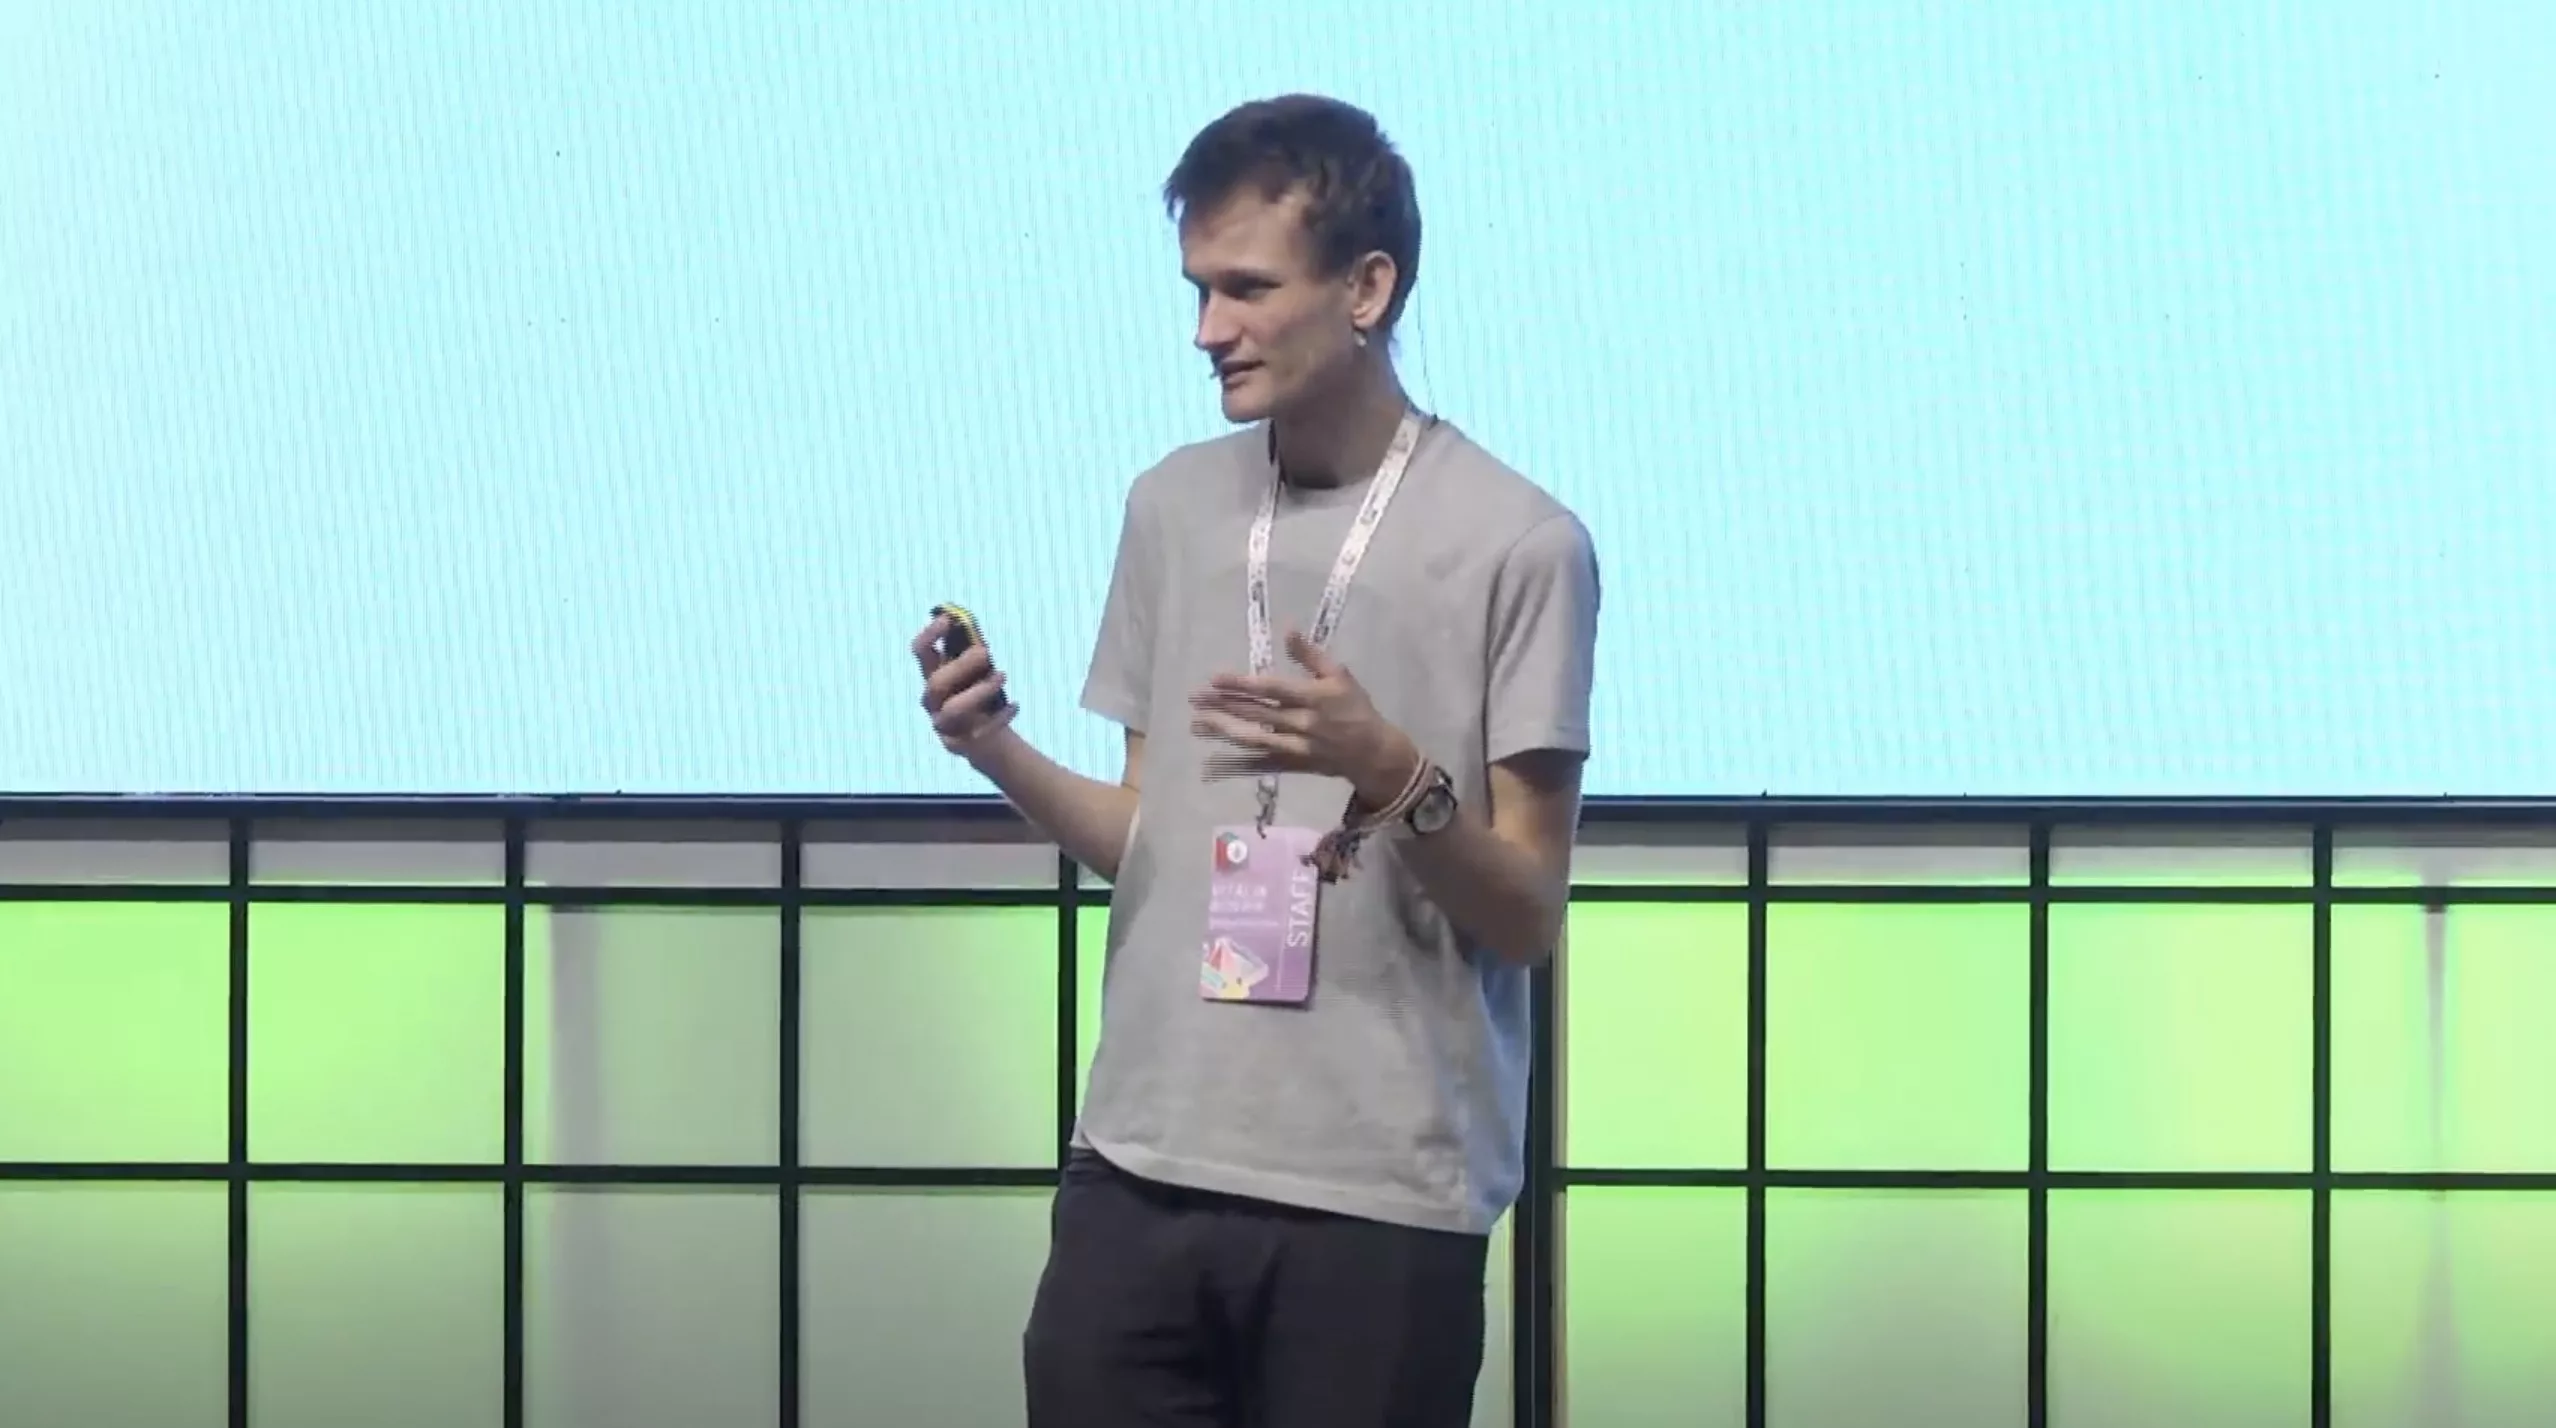 L2s Are Scaling Ethereum Says Vitalik Buterin